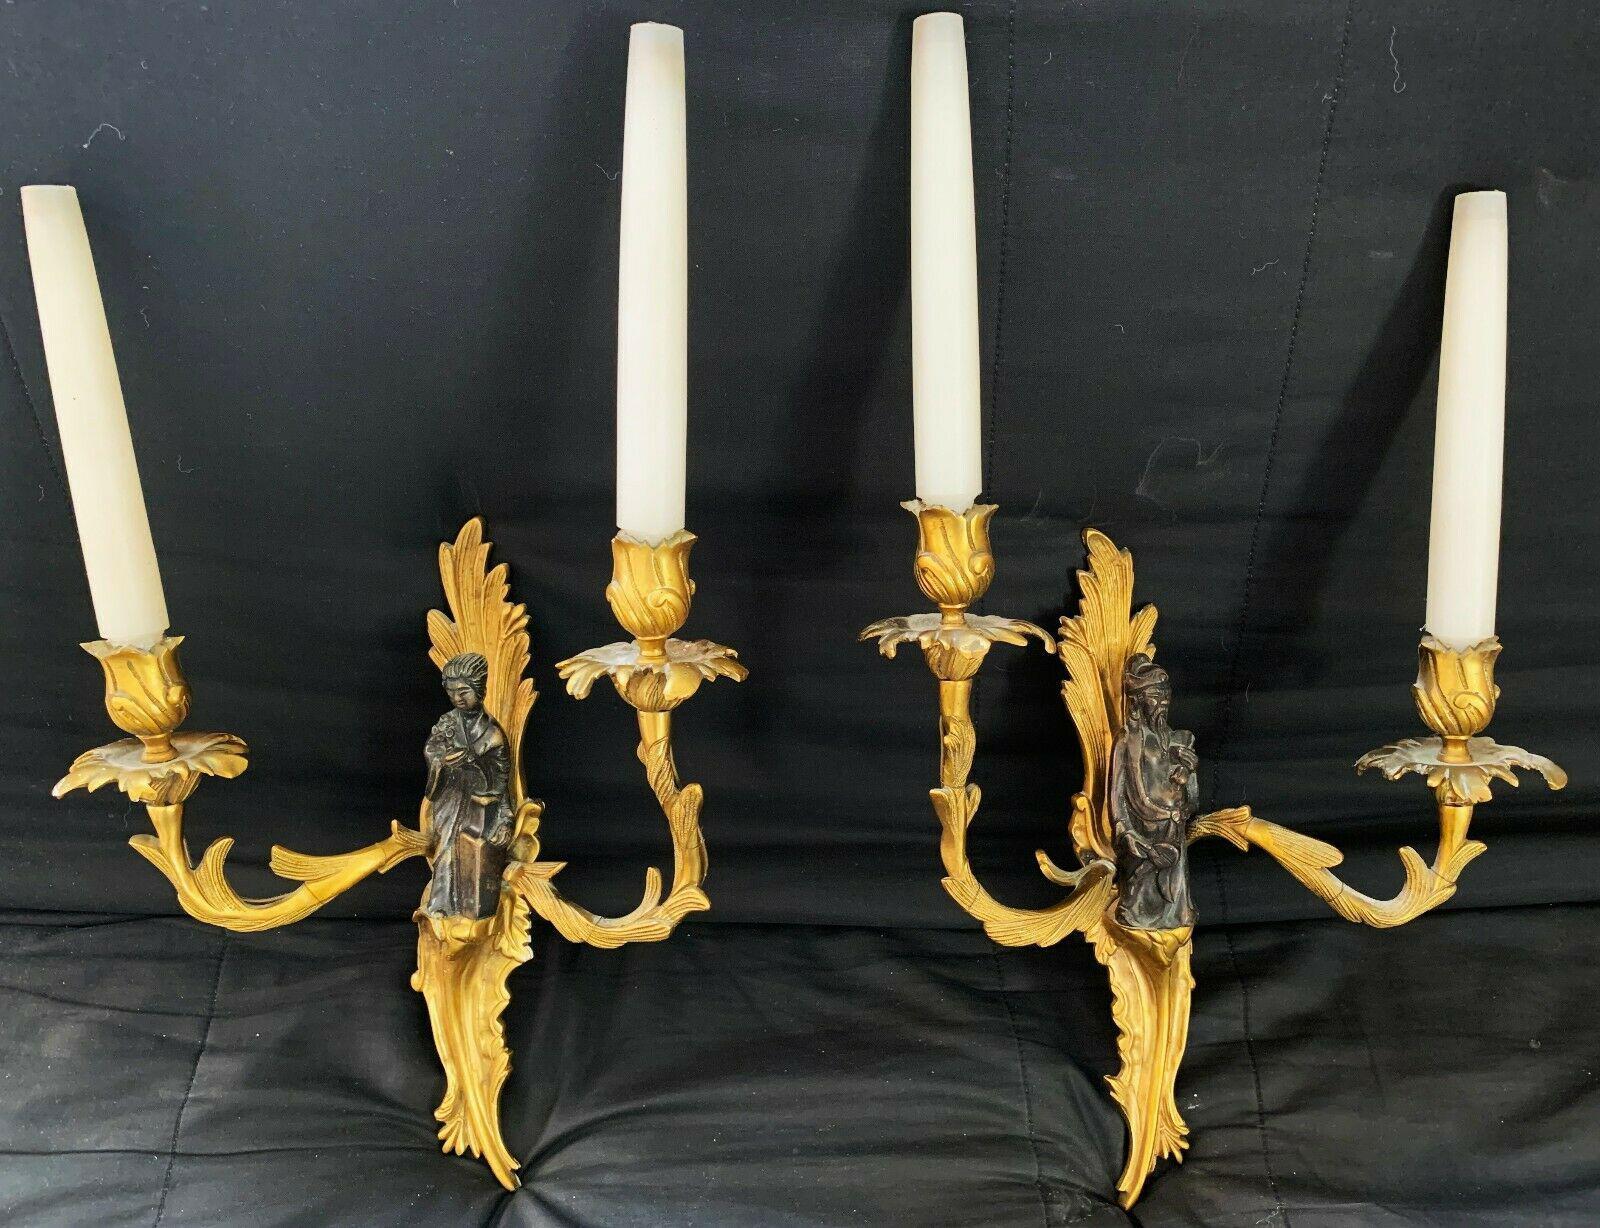 Pr. Antique French Maison Bagues style Chinoiserie Gilt & Patinated Wall Sconces For Sale 3